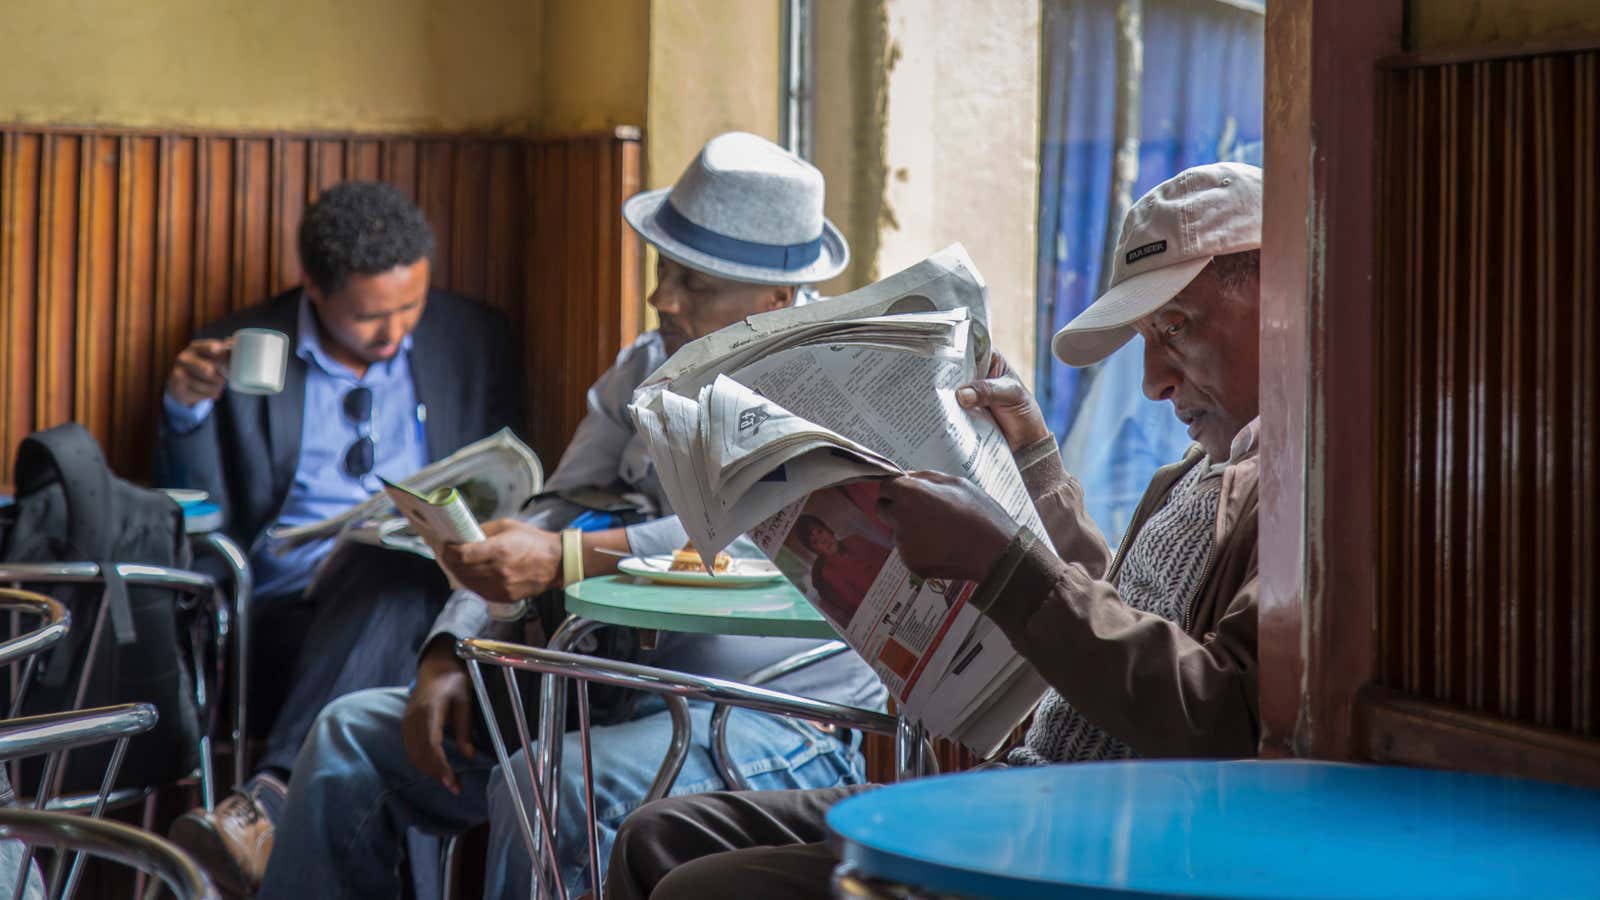 Press freedom has continued to decline in Ethiopia over the years.